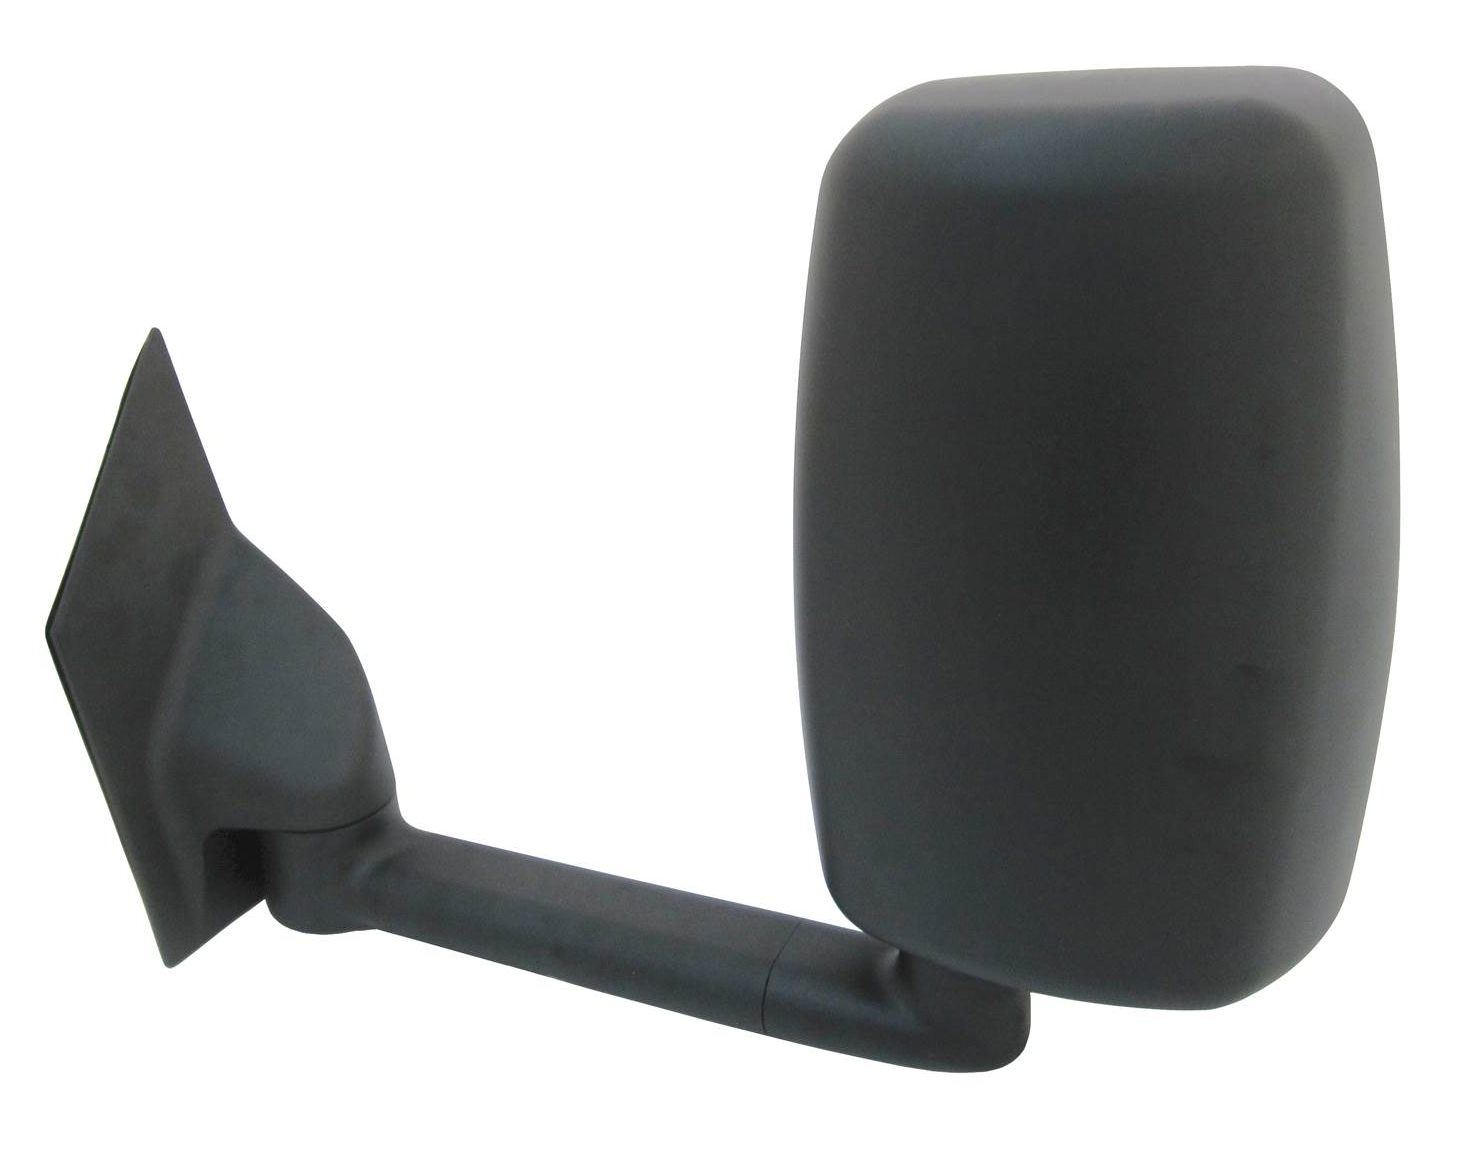 Aftermarket MIRRORS for CHEVROLET - EXPRESS 3500, EXPRESS 3500,03-11,LT Mirror outside rear view